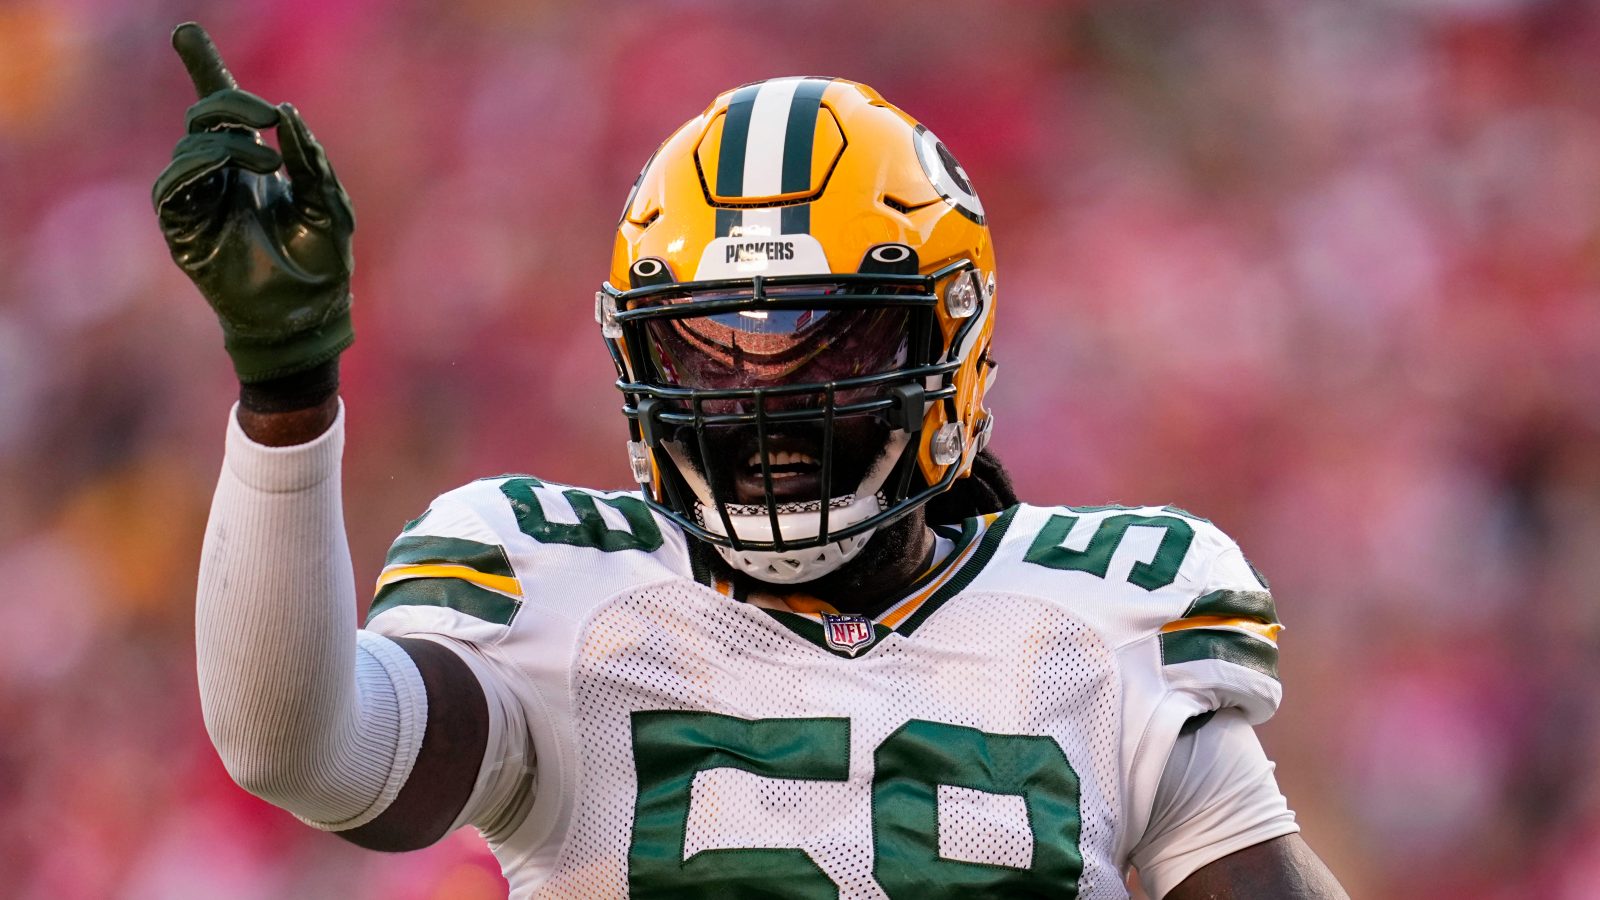 Report: De'Vondre Campbell, Packers Agree to Five-Year, $50 Million Deal